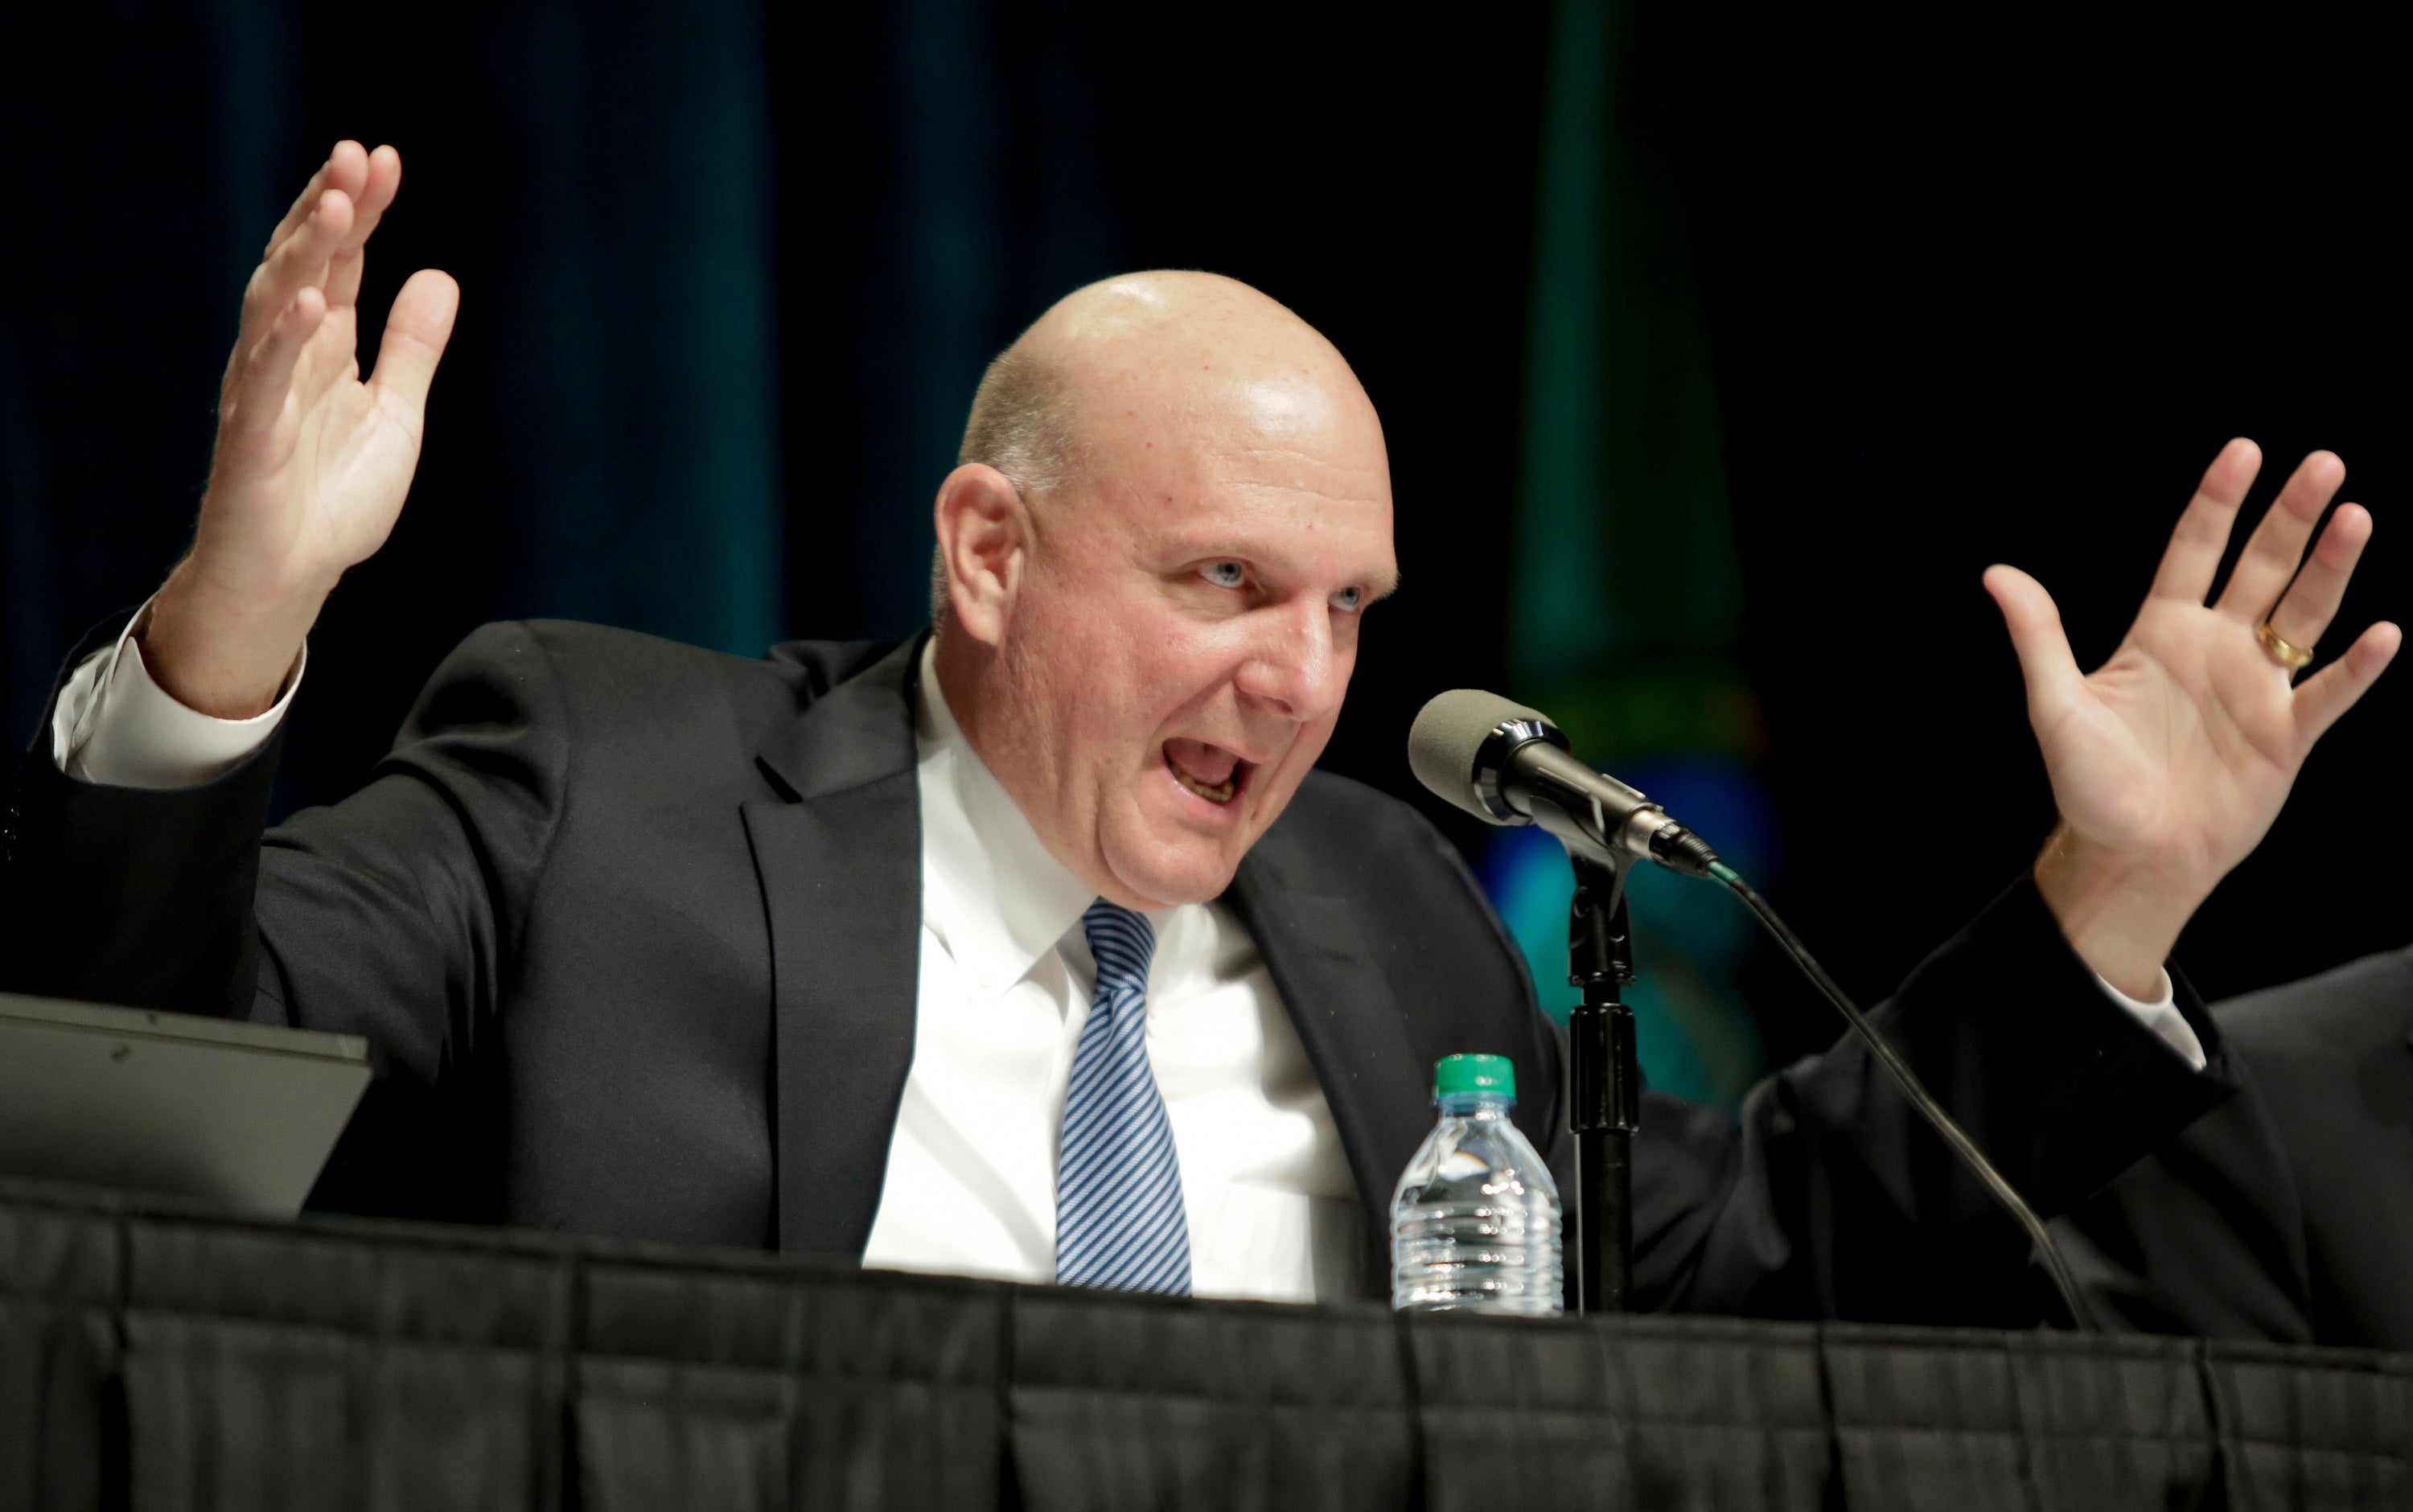 Ballmer answers questions at the company's annual shareholder meeting in Bellevue, Washington November 19, 2013.